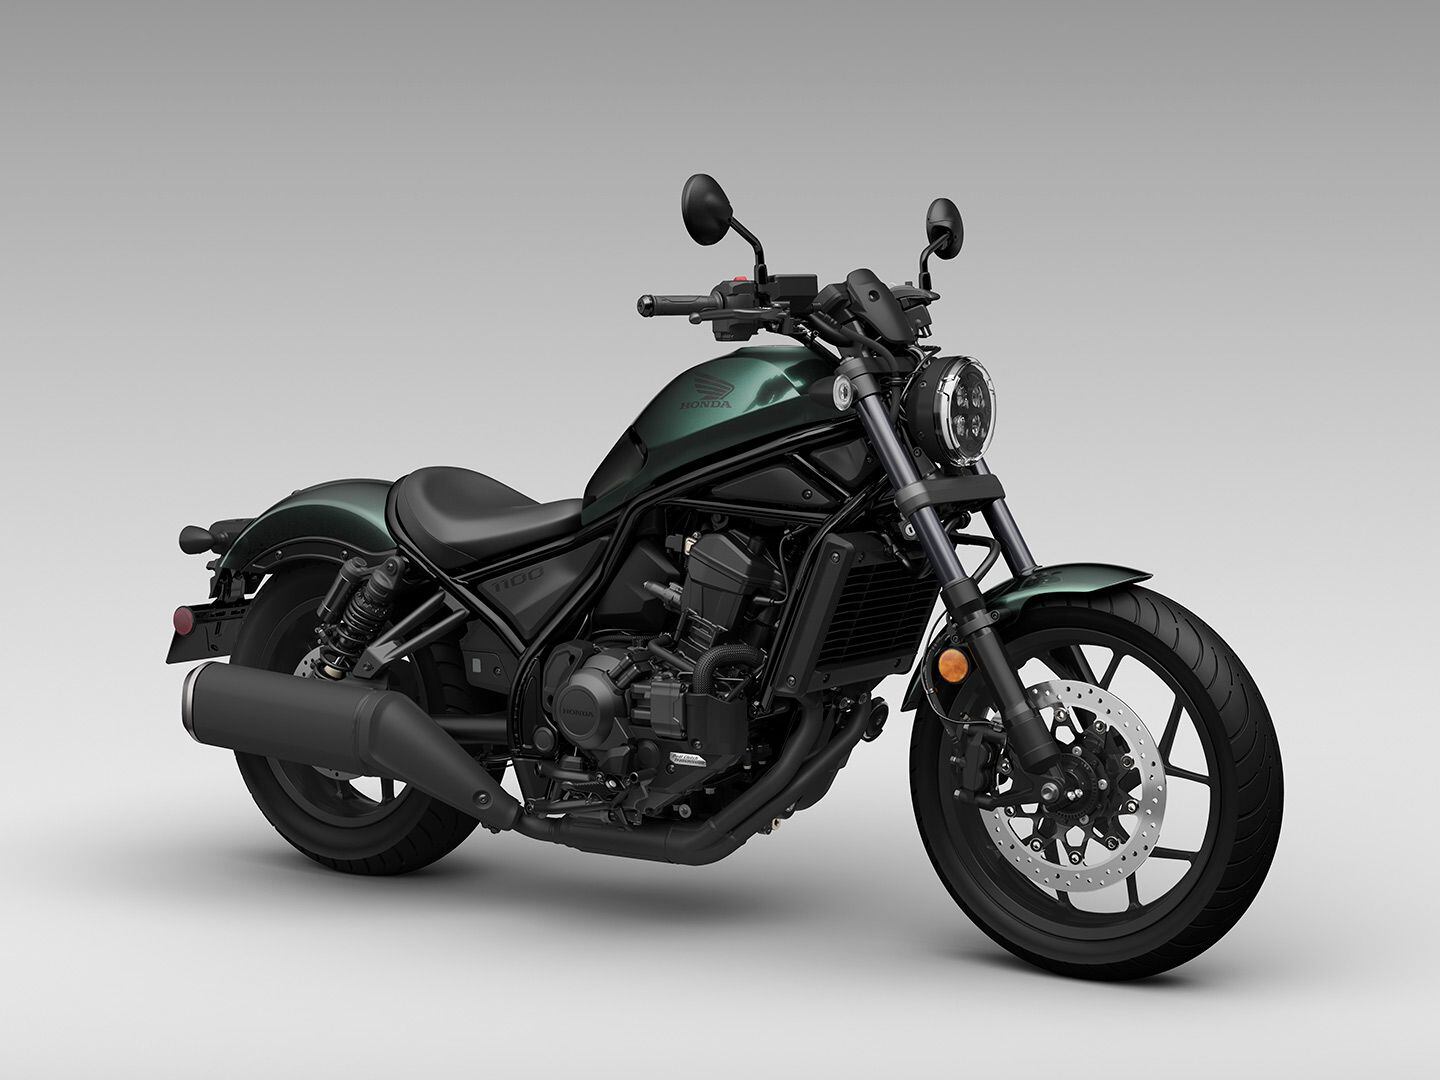 The 2023 Rebel 1100 in Green Metallic. The pinnacle of the Rebel lineup, the 1100 is a landing point for scores of riders who have cut their teeth on the Rebel 300 and Rebel 500. A low 27.5-inch seat-height, adjustable power delivery, and optional automatic transmission mean the leap from 500 to 1100 isn’t too great.